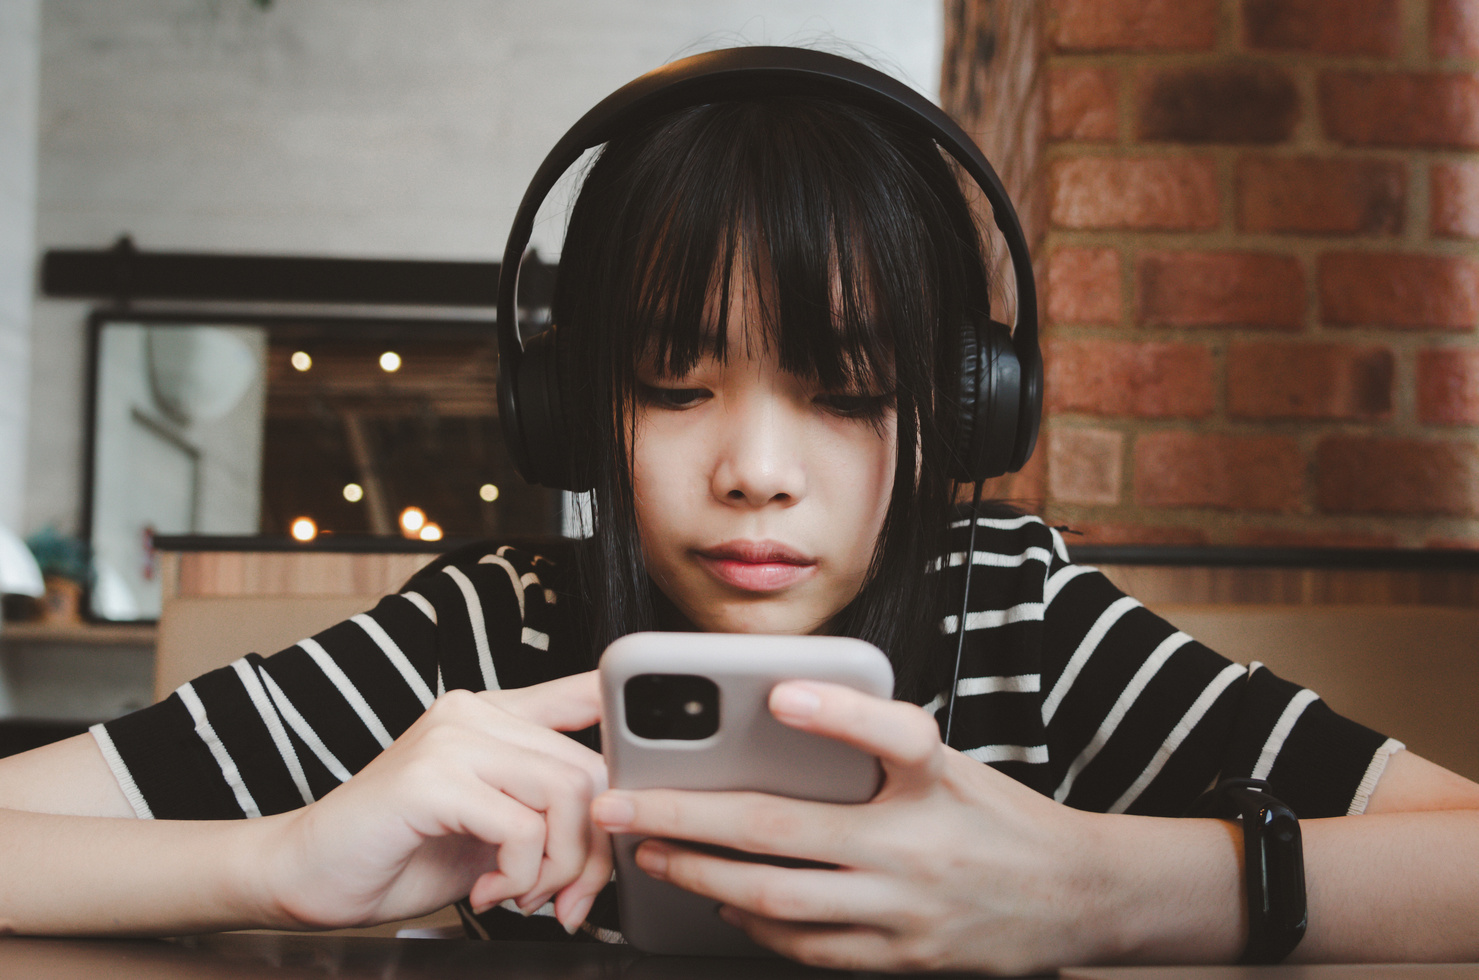 Teenage girl wearing headphones and holding a cell phone sma